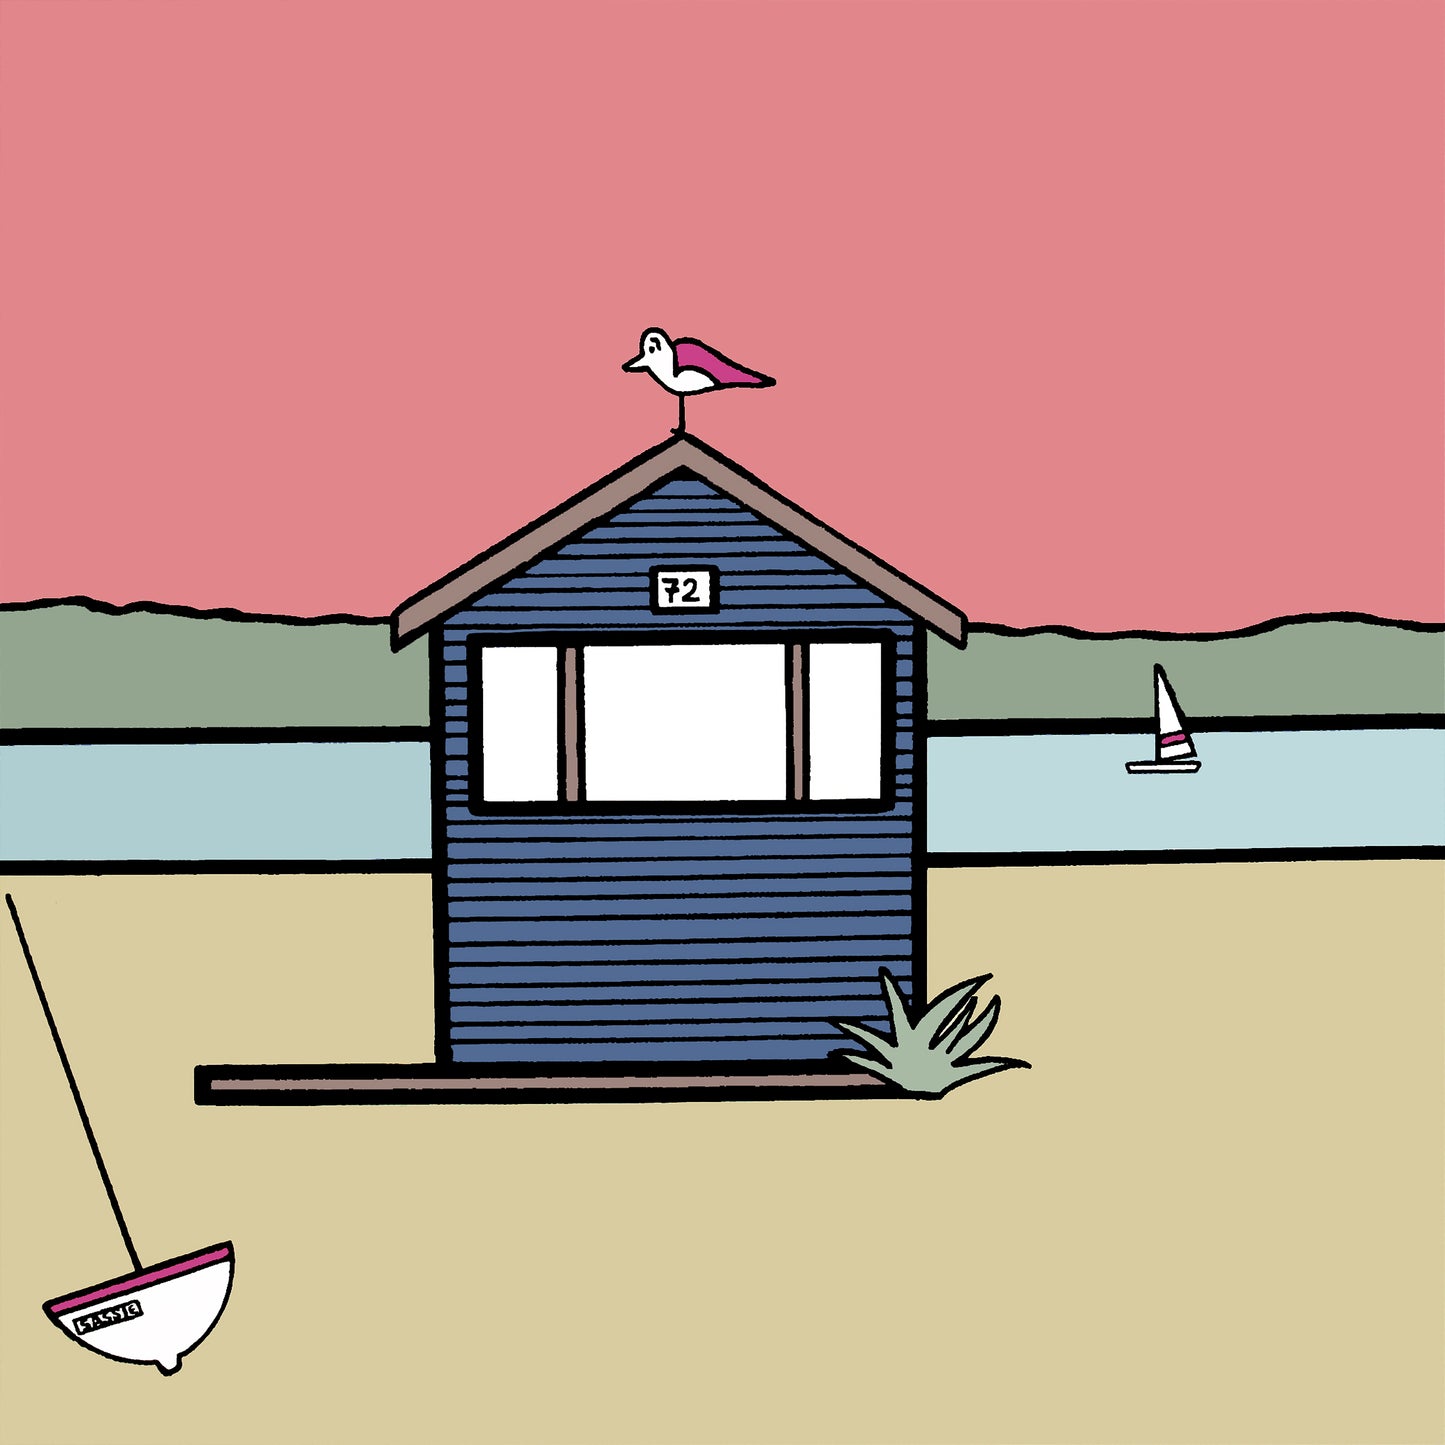 A navy blue beach hut with the number 72 has a pink winged seagull perched on top. The ground is a sandy colour with a small leaning boat. A small plant and wooden deck is at the bottom of the beach hut, with a landscape of the sea in the background, greenery and a warm pink sky. A small sailing boat is in the water. 